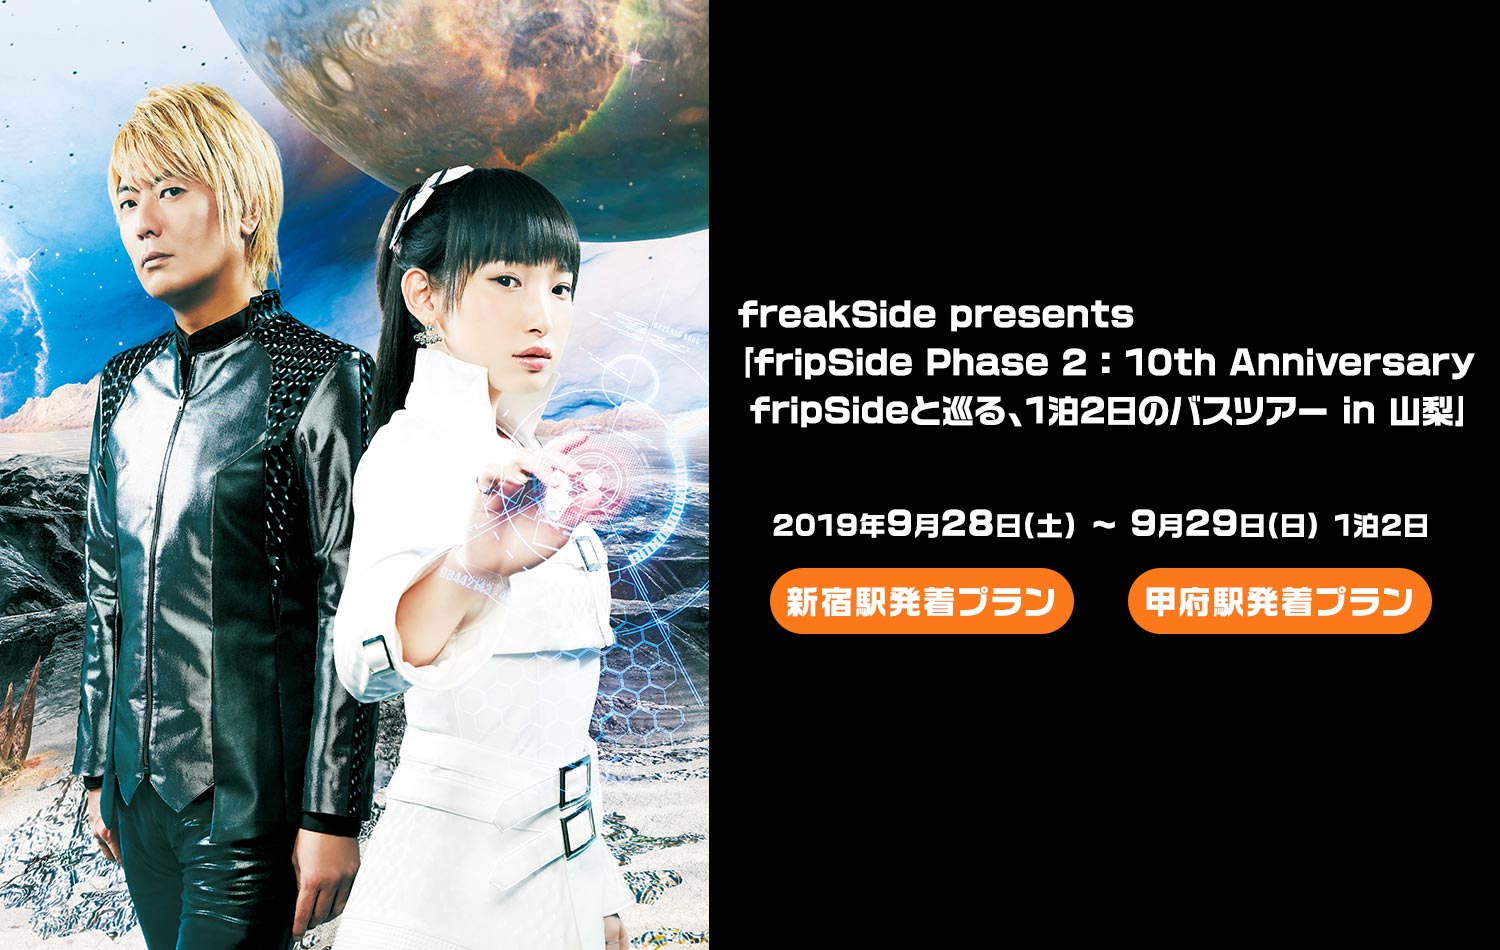 freakSide presents「fripSide Phase 2 : 10th Anniversary fripSideと 